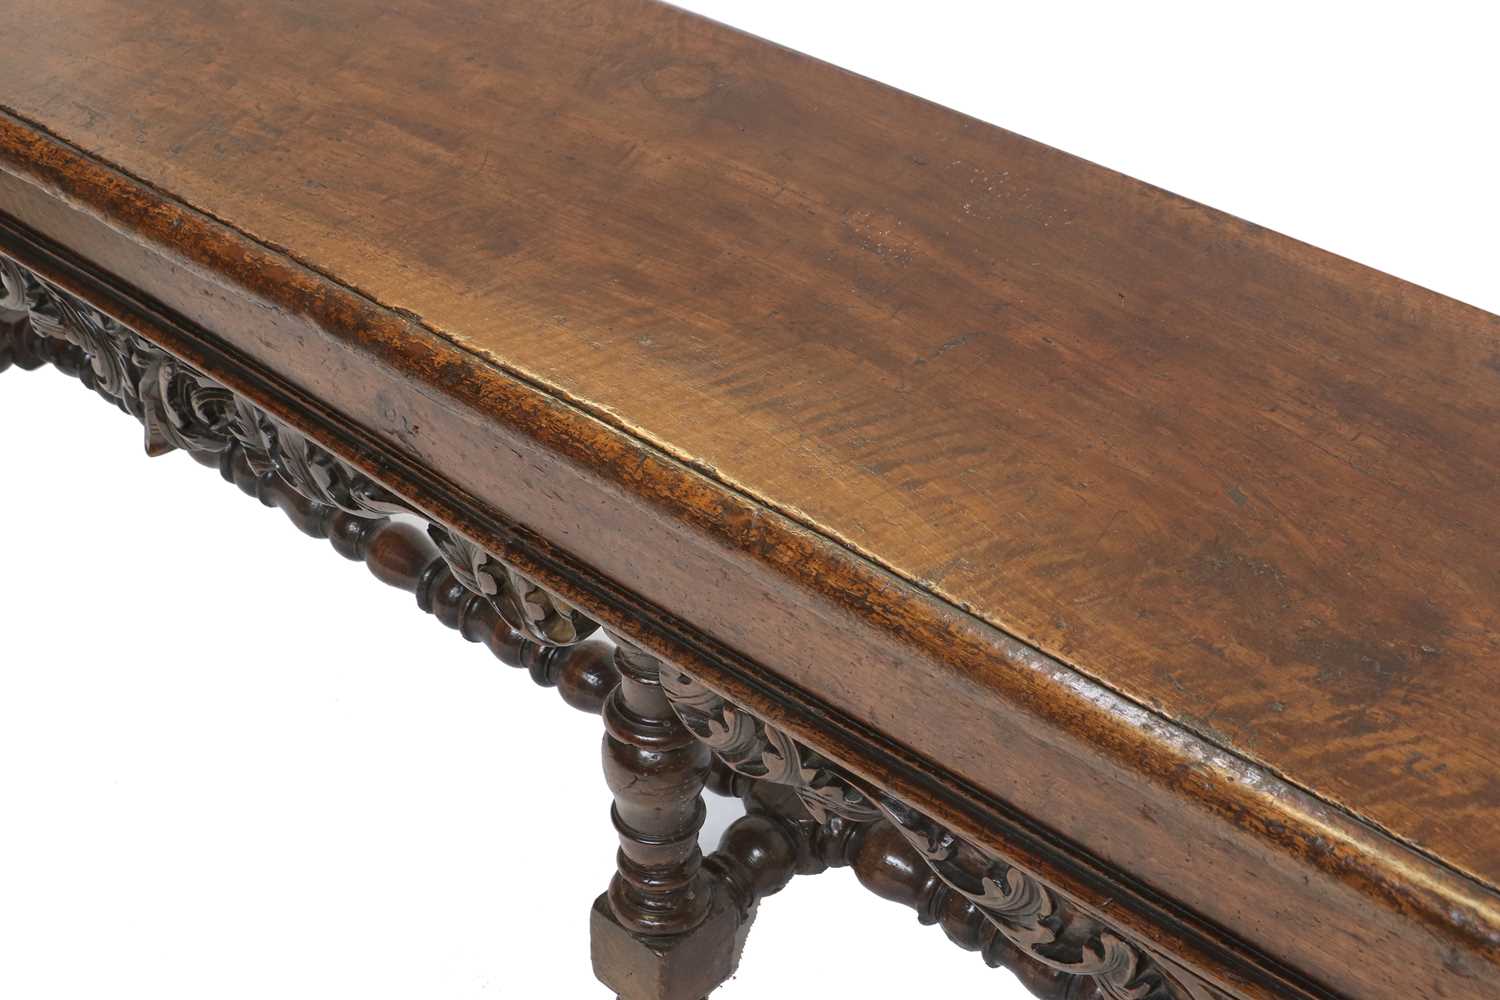 An Early 18th Century Turned Walnut Double Stool, the moulded top with moulded seat rail and - Image 3 of 7